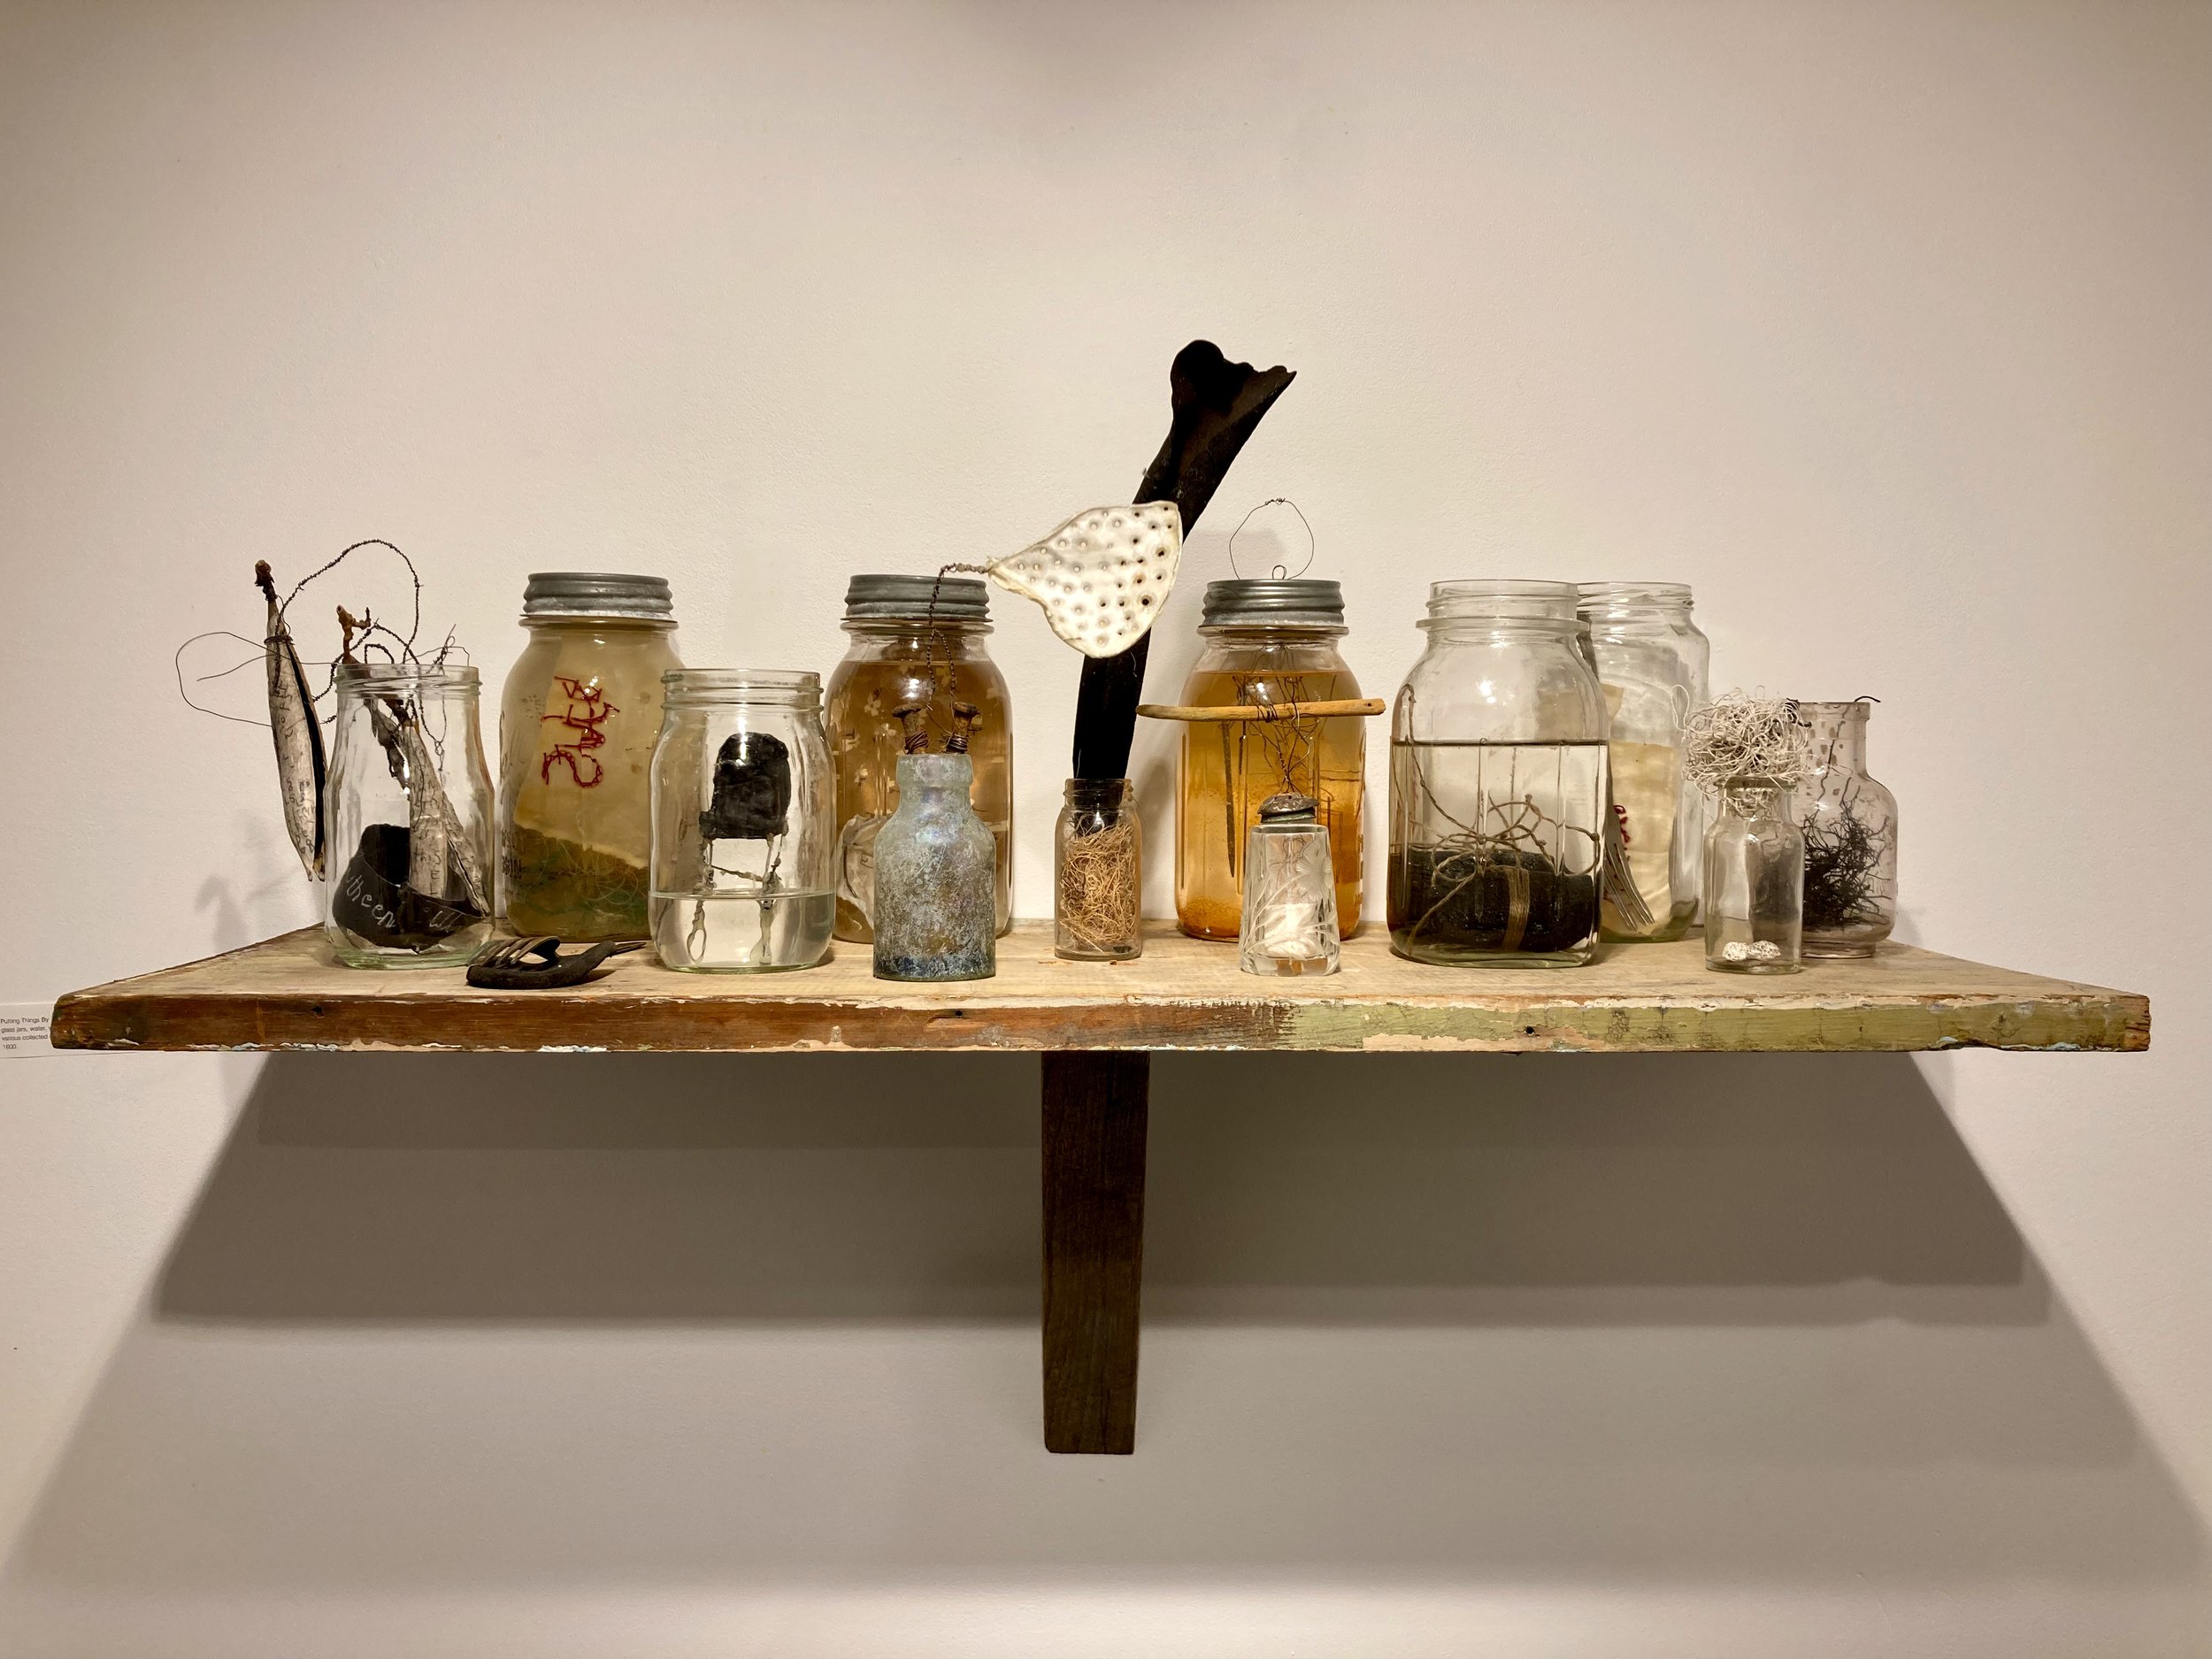   Putting Things By , 2021. Glass jars, water, wire, coal, ink, nails, paper, various collected objects. 